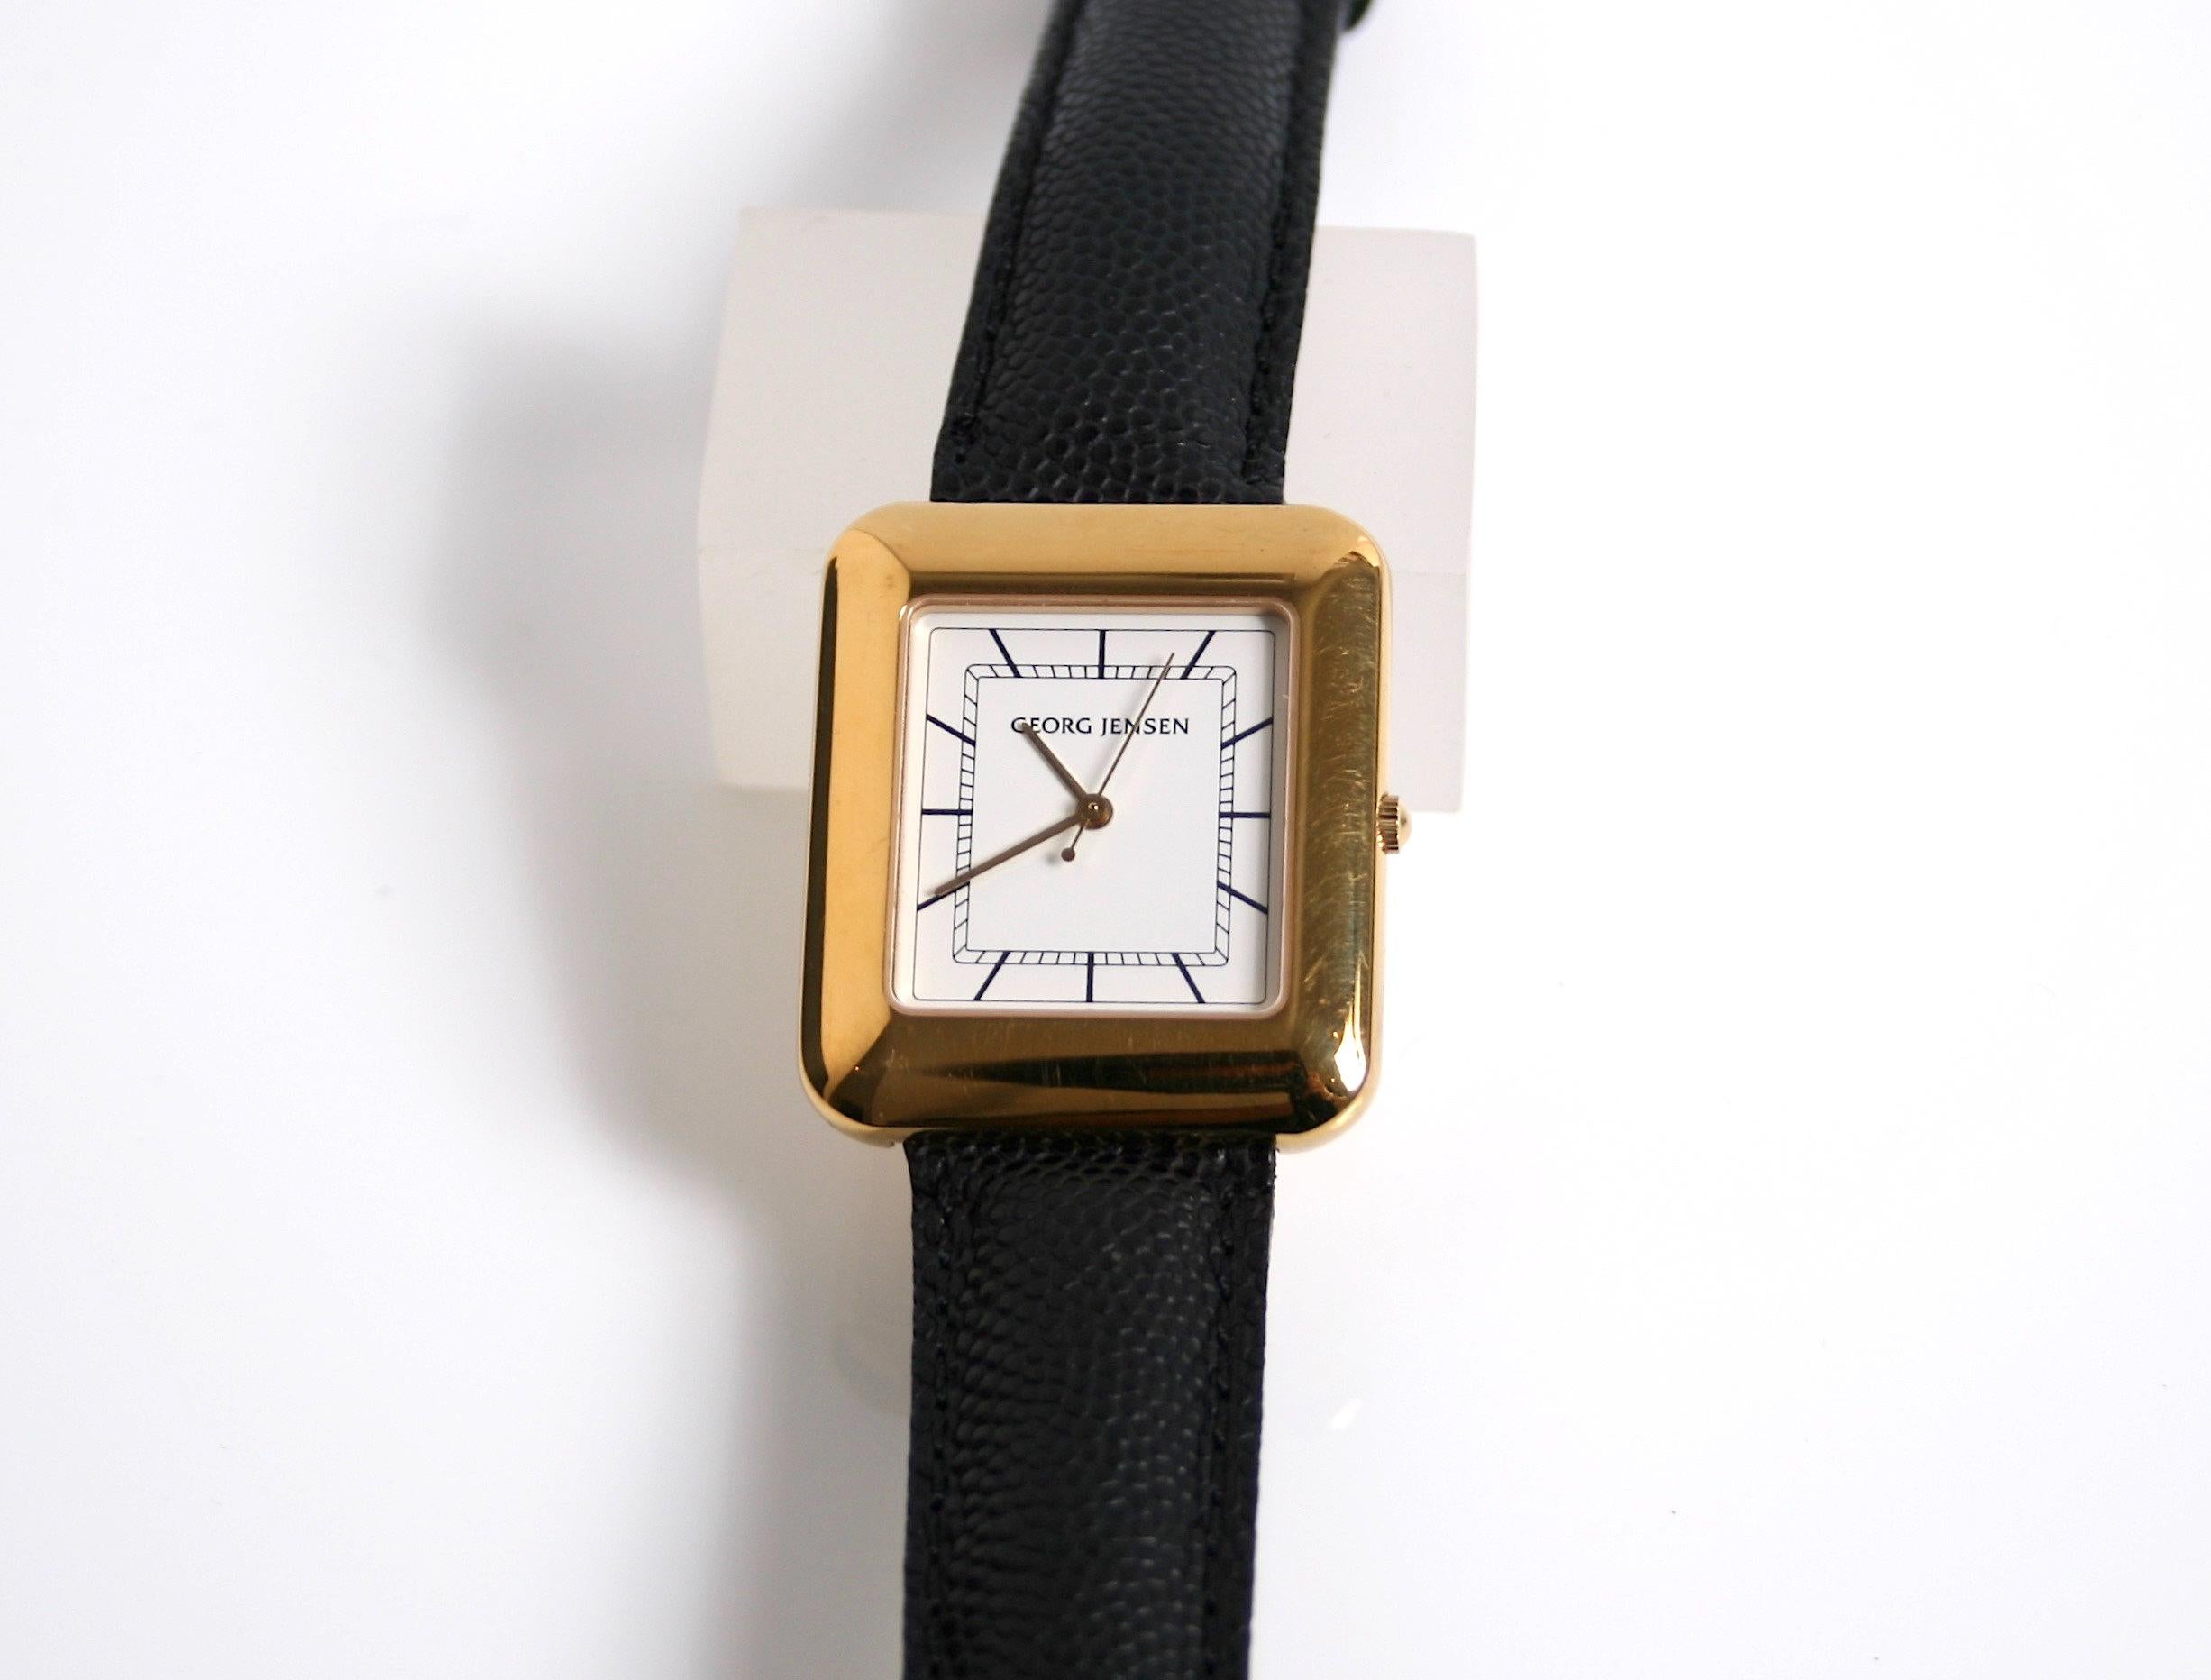 Rare Georg Jensen 18 Karat Gold vermeil quartz Watch Designed by Line Munth Denmark c1980
Crisp white face with black numerals with gold hands

Design number 354 comes in the original Jensen box
New old stock still has protective film on reverse